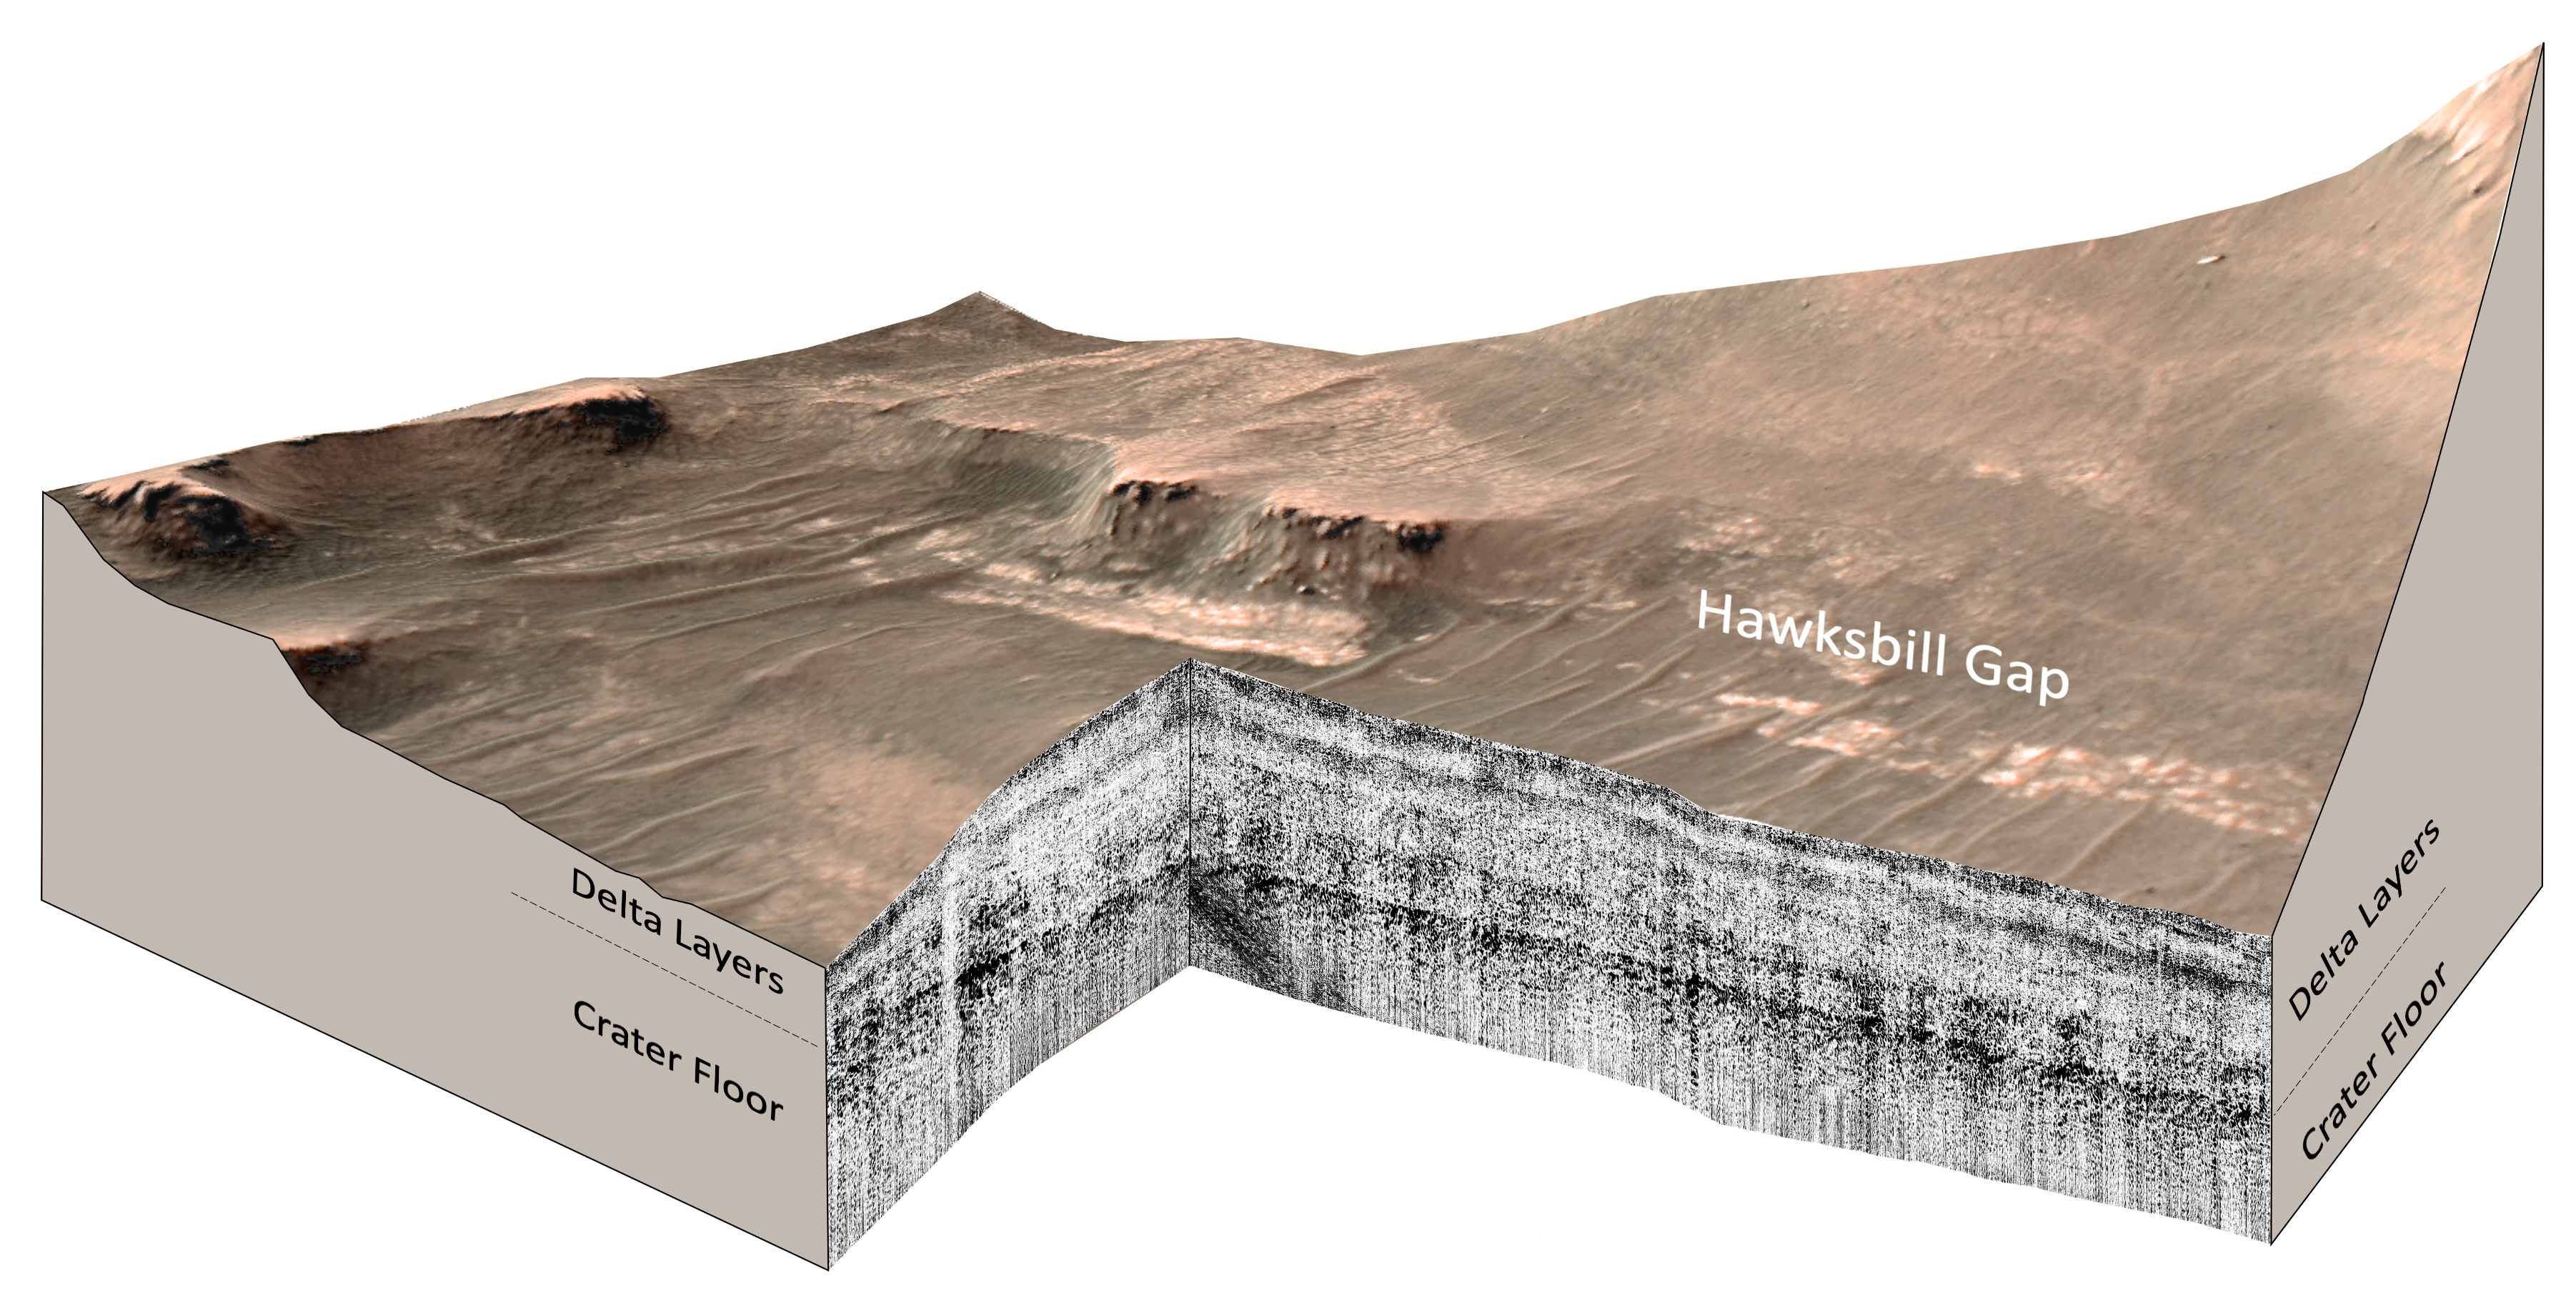 A 3D cross-section showing the surface of Mars and the layers of sediment beneath it.